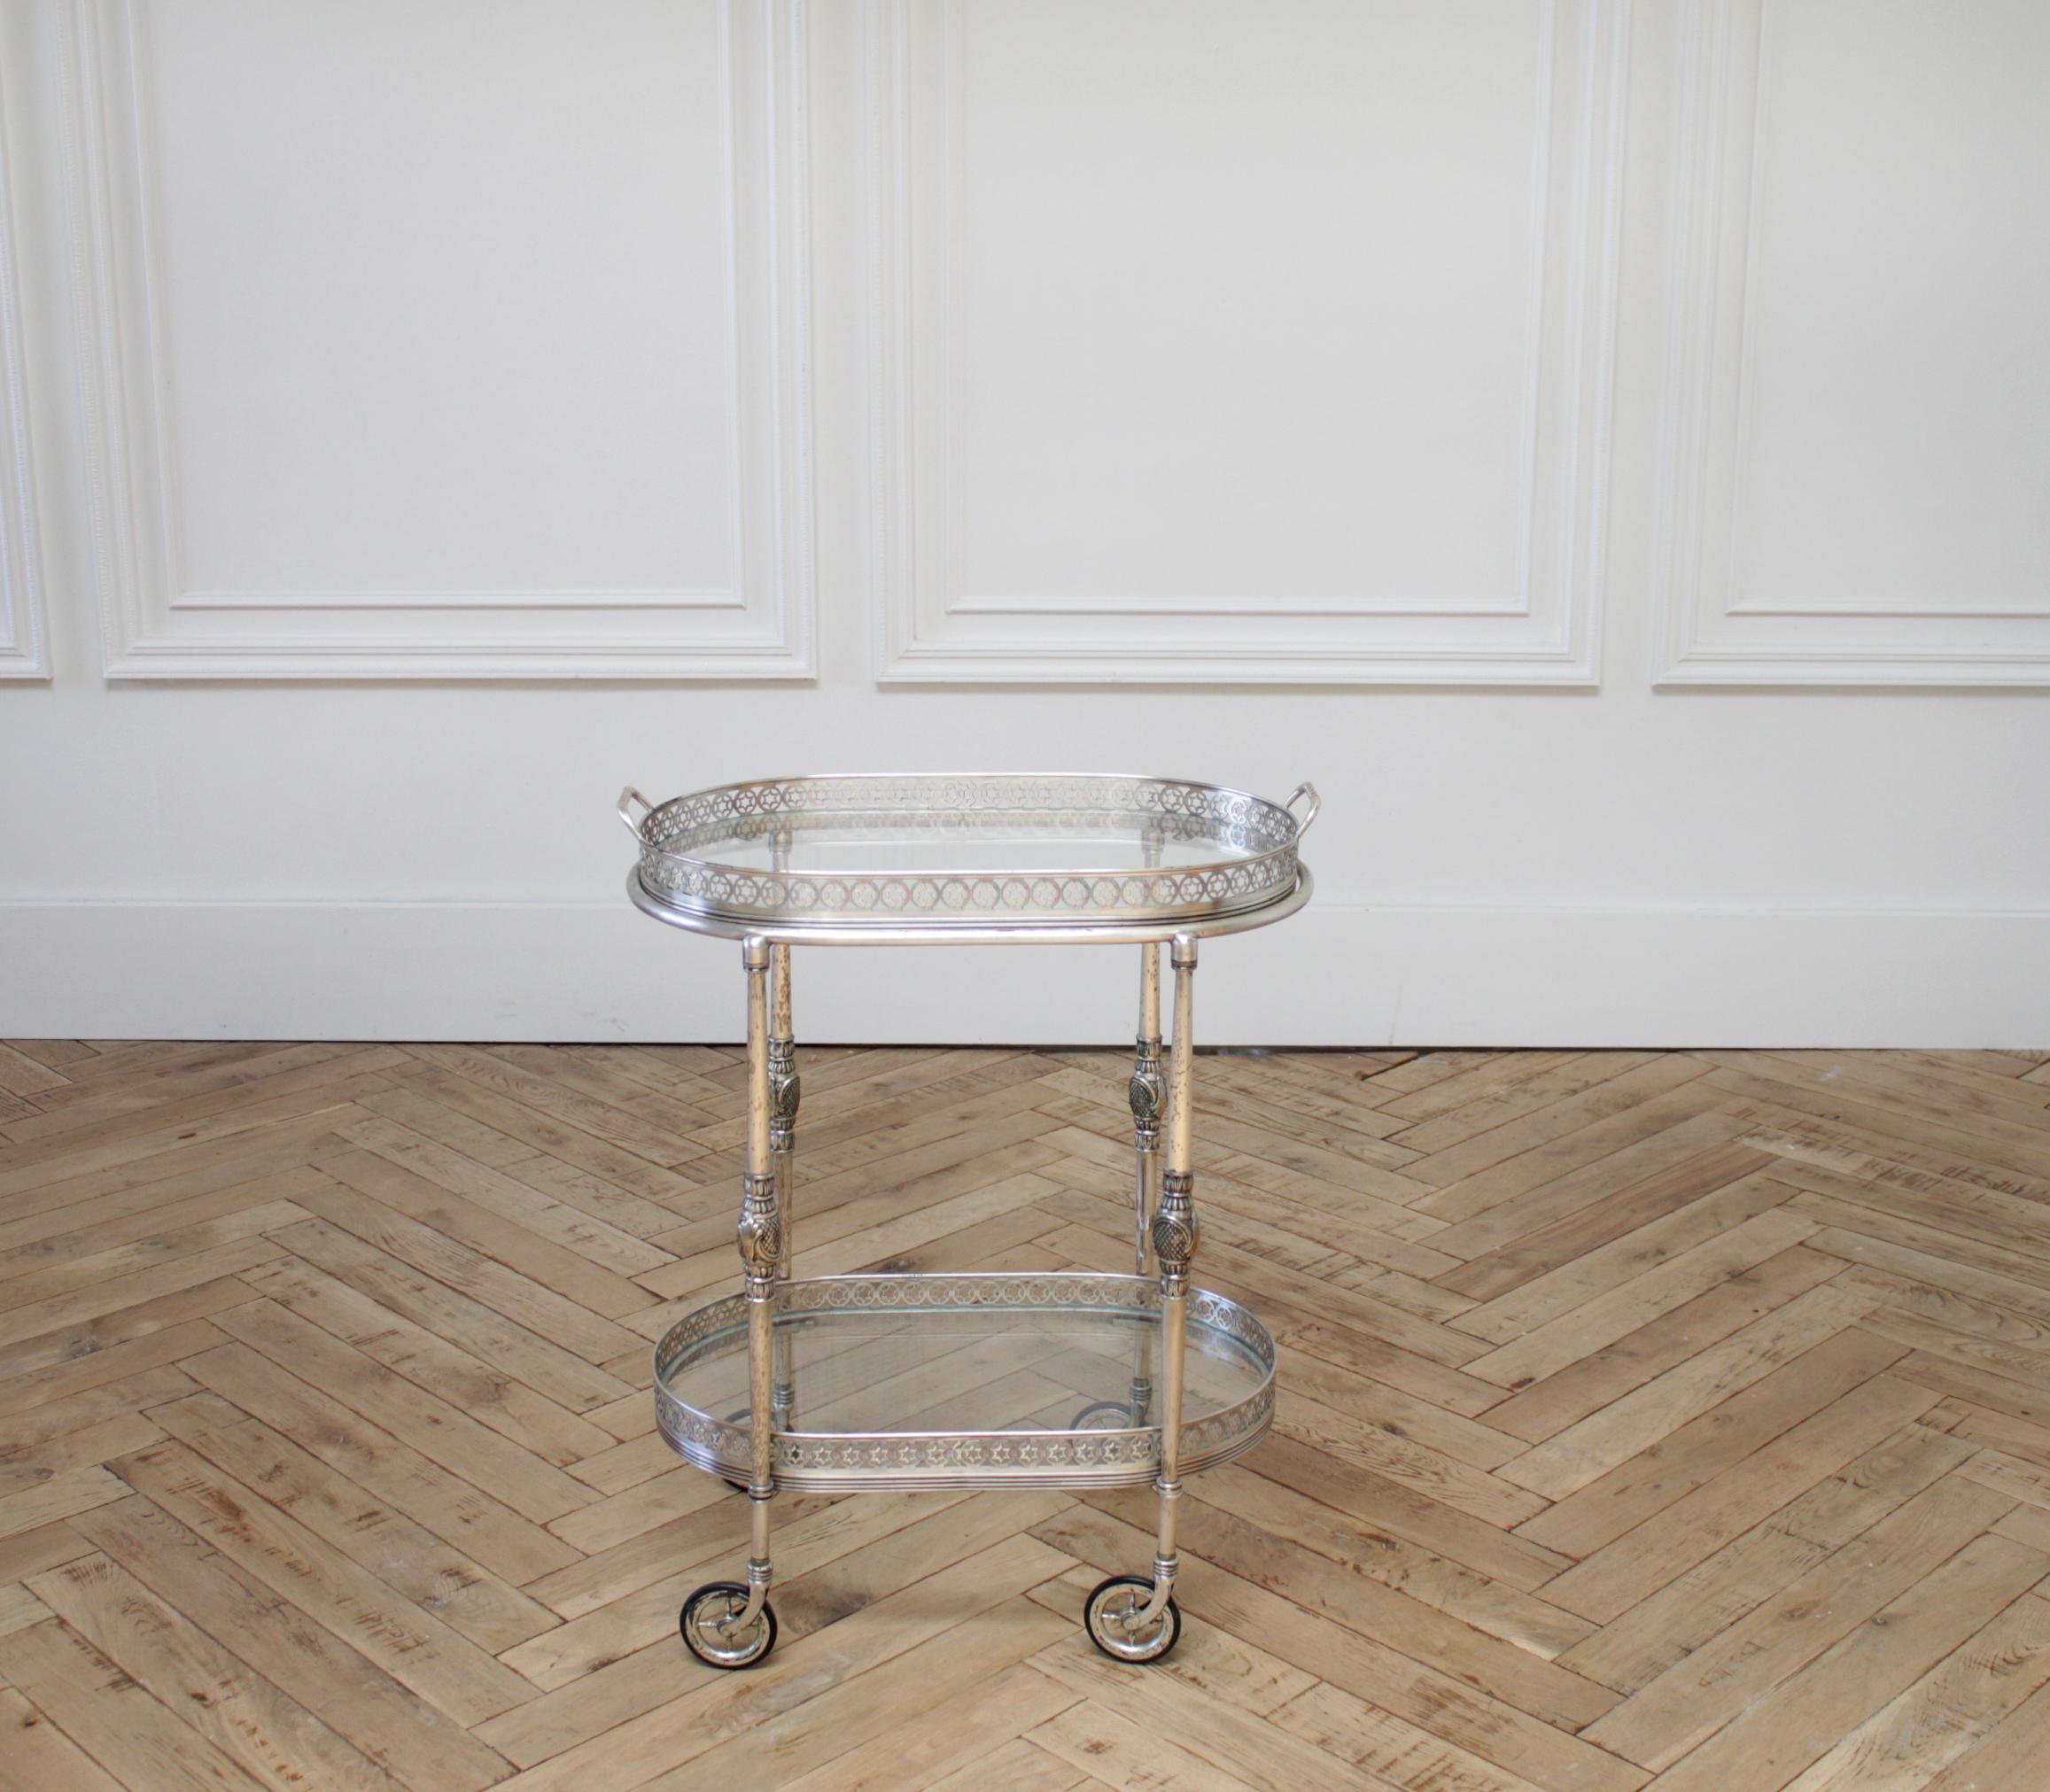 Vintage tea cart serving tray in silver finish
Petite bar cart in a silver finish, with rubber wheels. The top is a tray that can lift off to take and use to serve with.
Glass top and bottom shelf, is removable.
Measures: 21